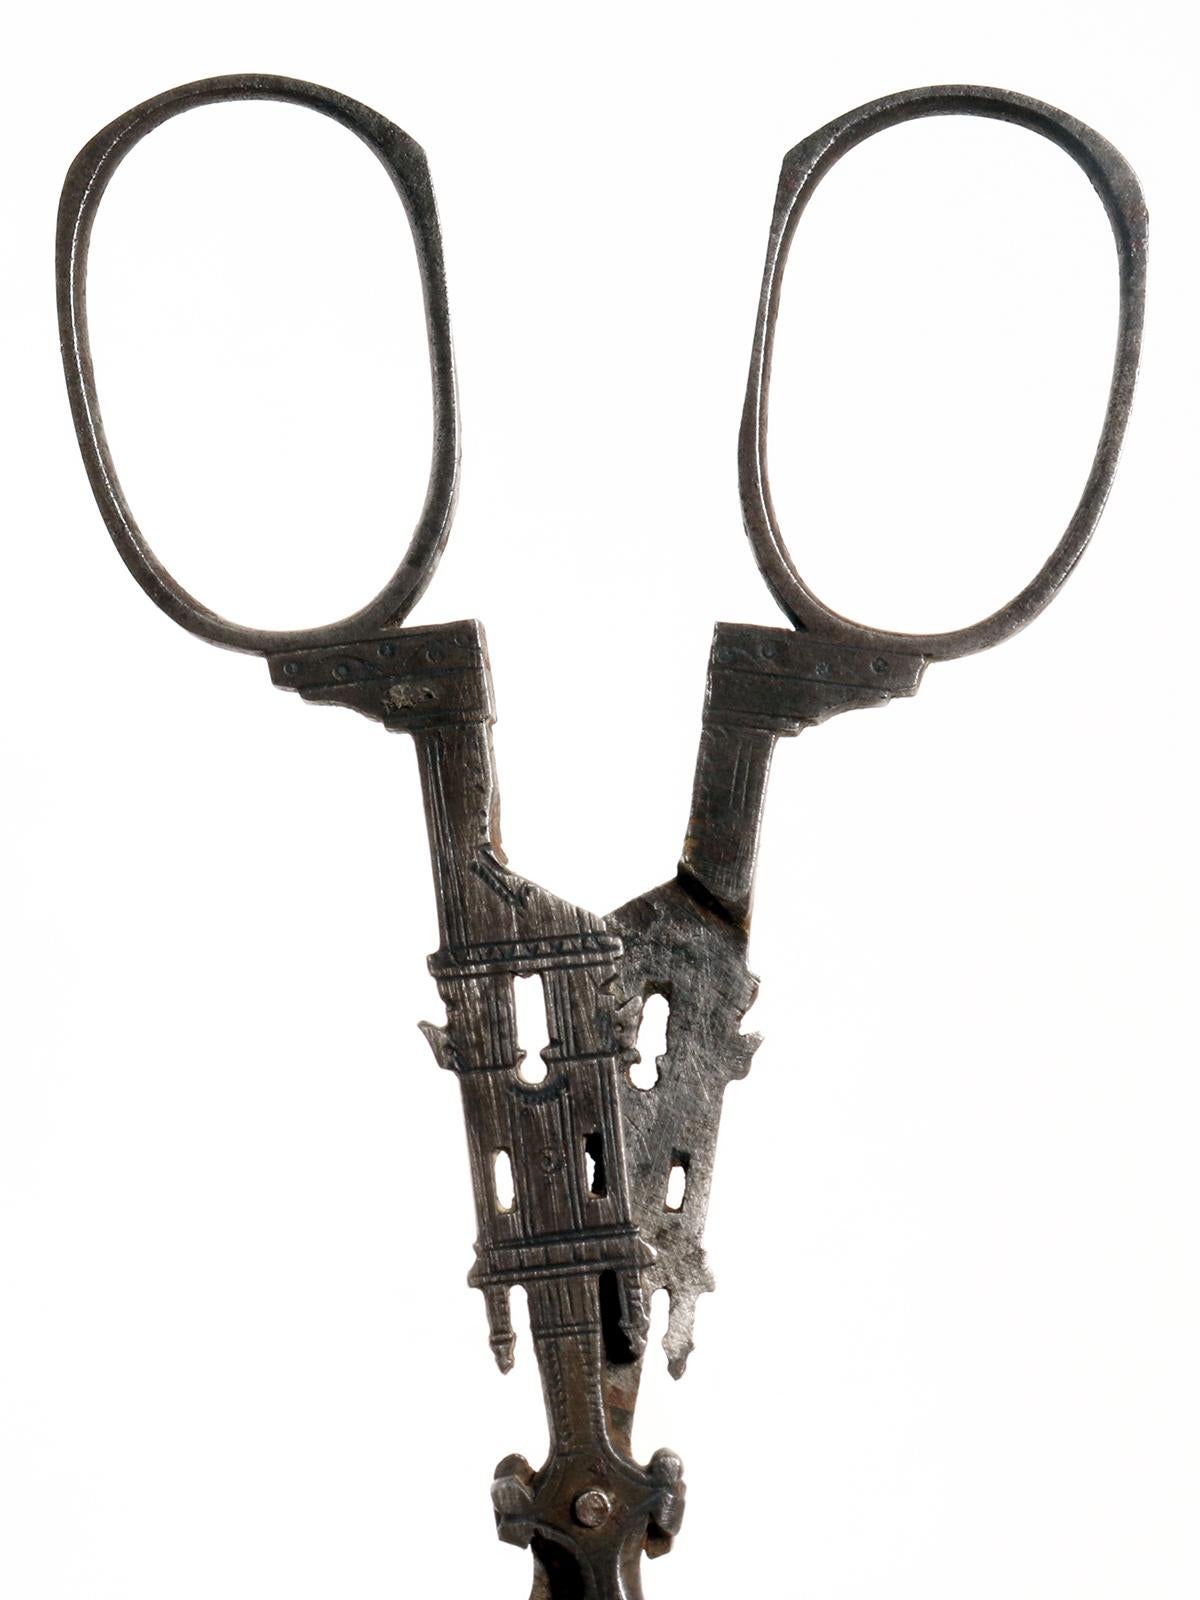 Embroidery Scissors, Iron, in the Shape of a Tower, Germany, 1840 For Sale 2